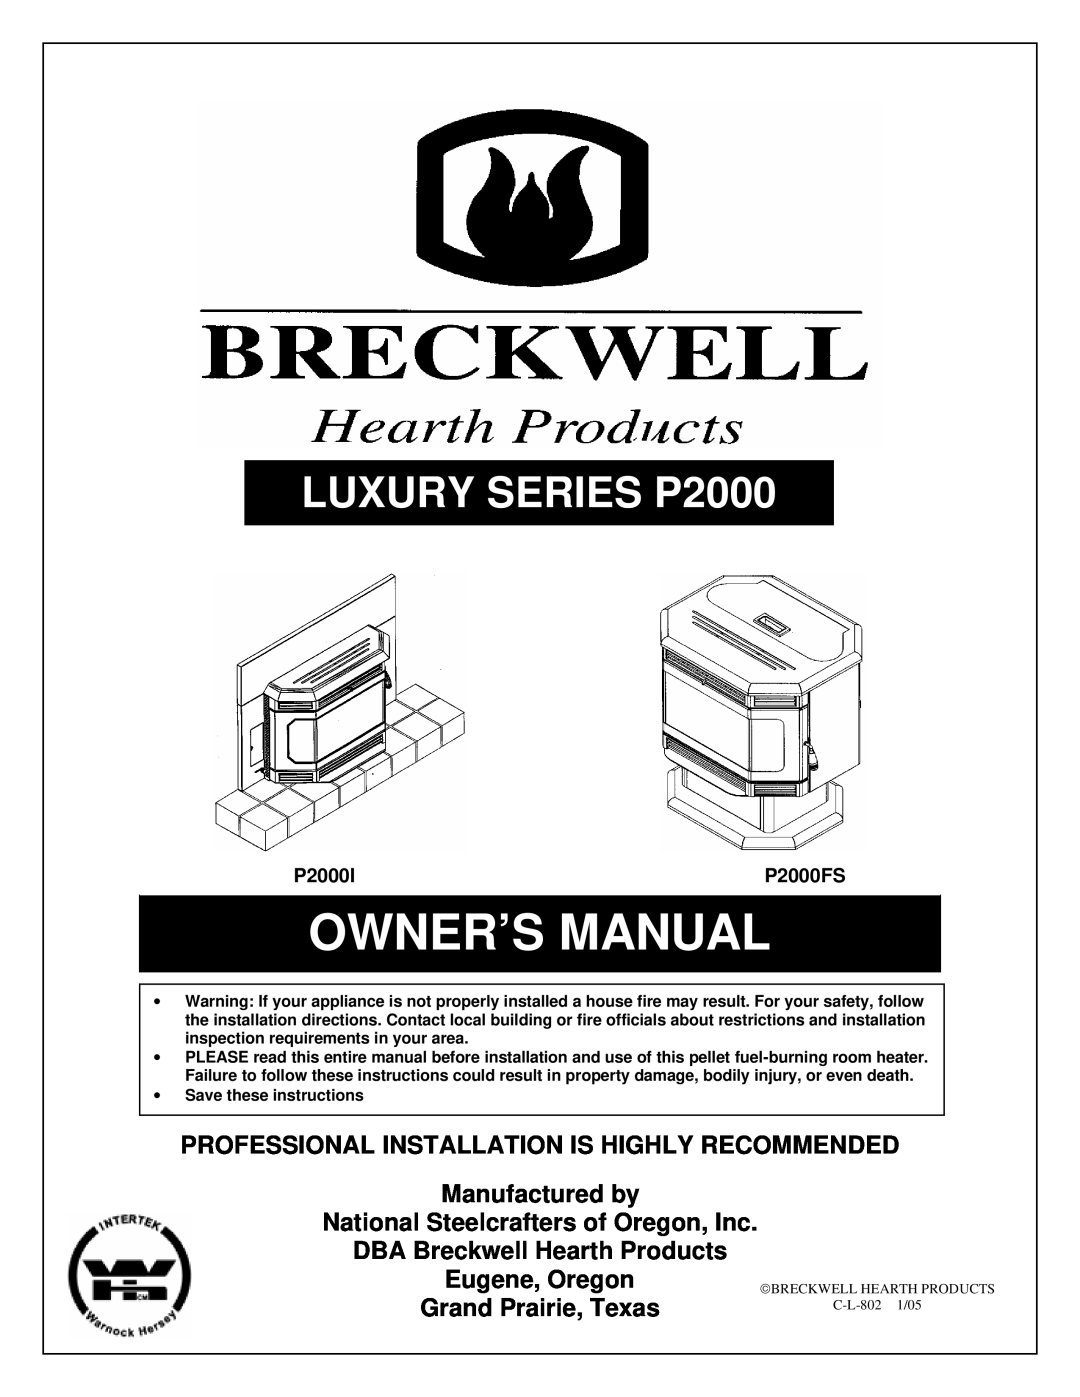 Breckwell P2000FS owner manual Professional Installation Is Highly Recommended, Manufactured by Breckwell Hearth Products 